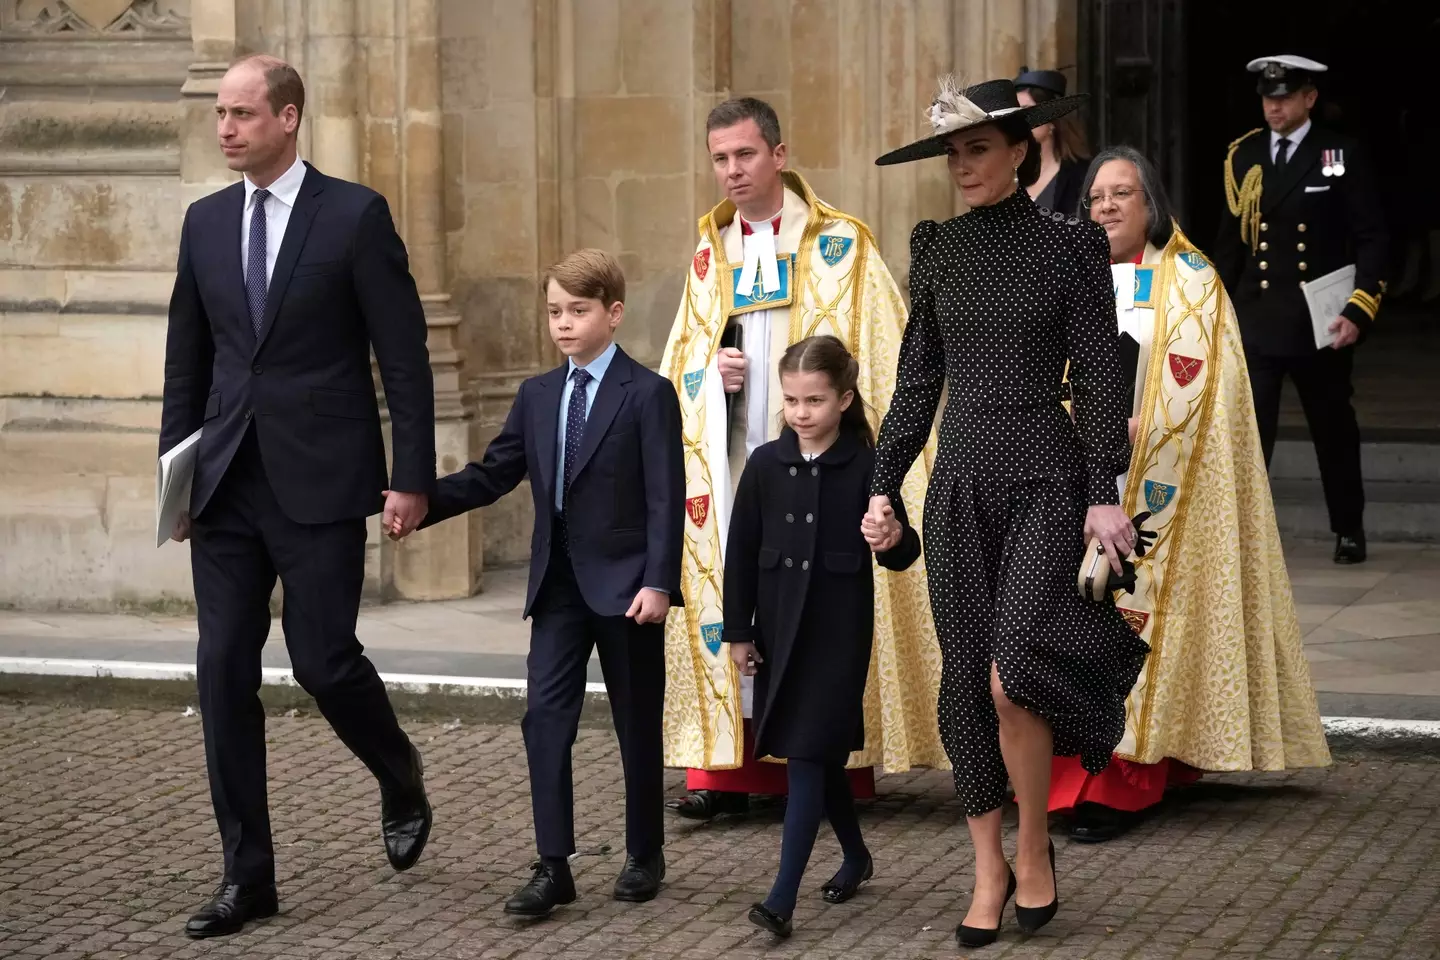 This was George and Charlotte's first major royal event. (